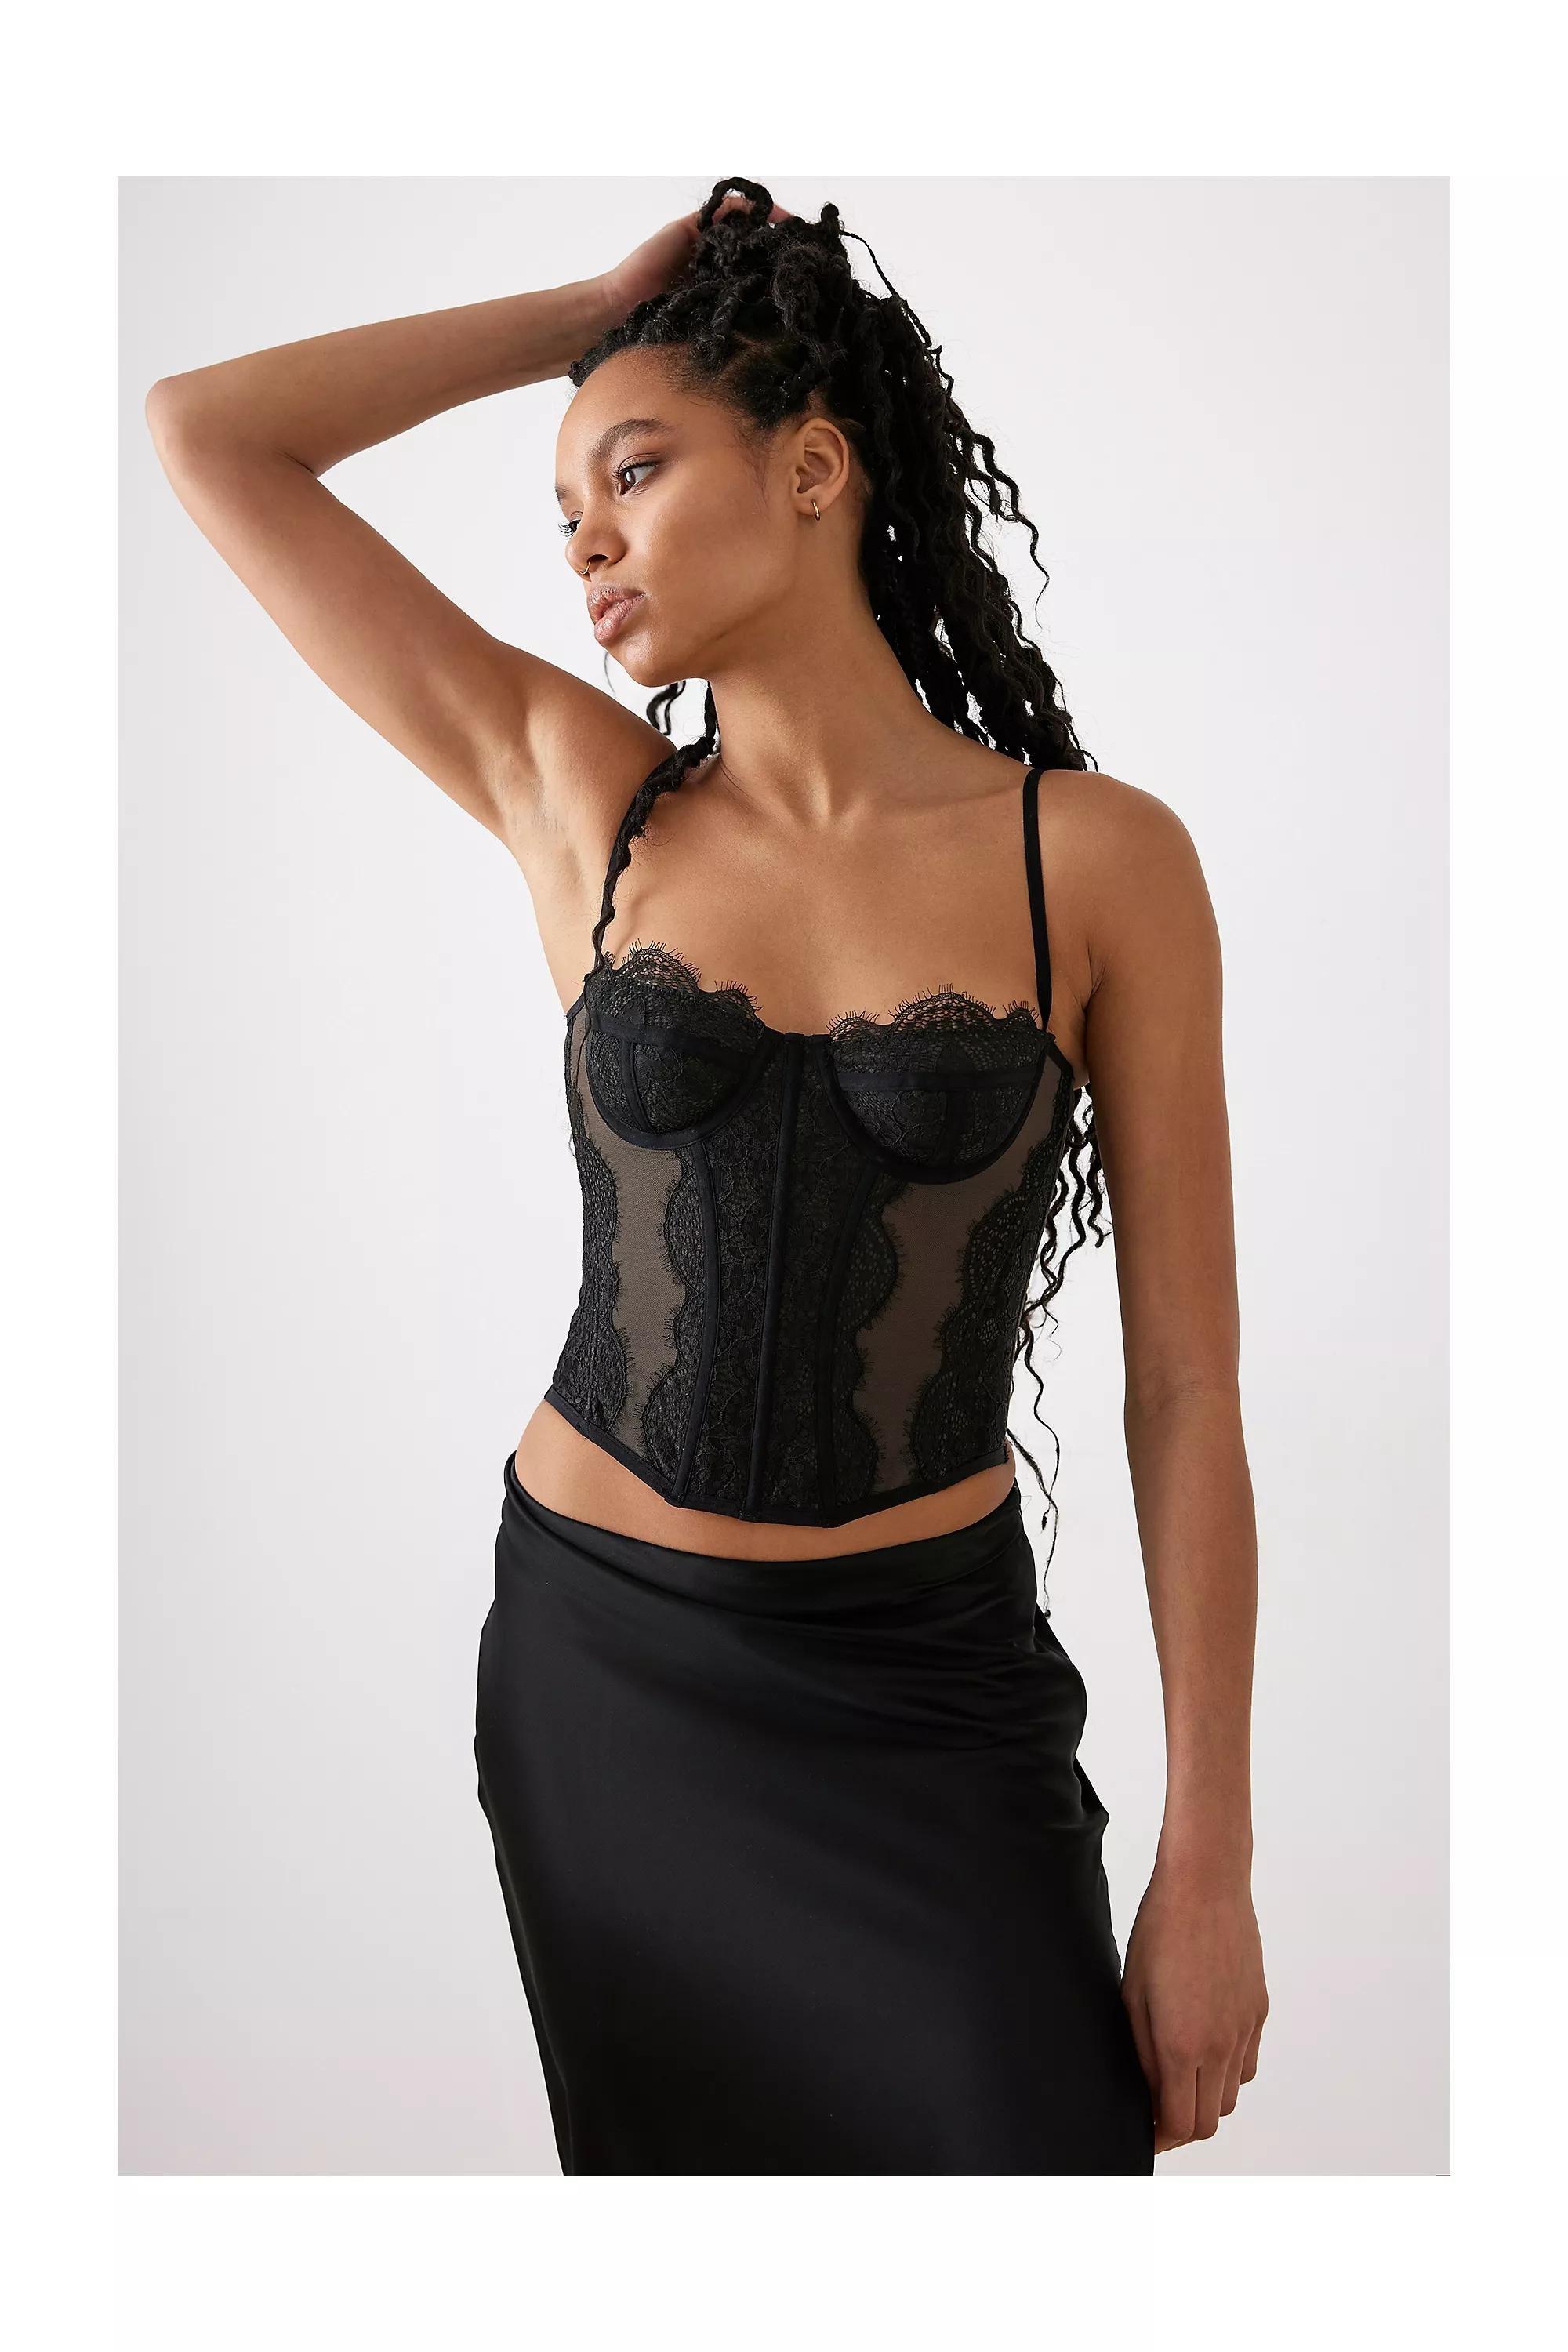 Out From Under Divine Modern Love Embroidered Corset  Urban Outfitters  Singapore - Clothing, Music, Home & Accessories